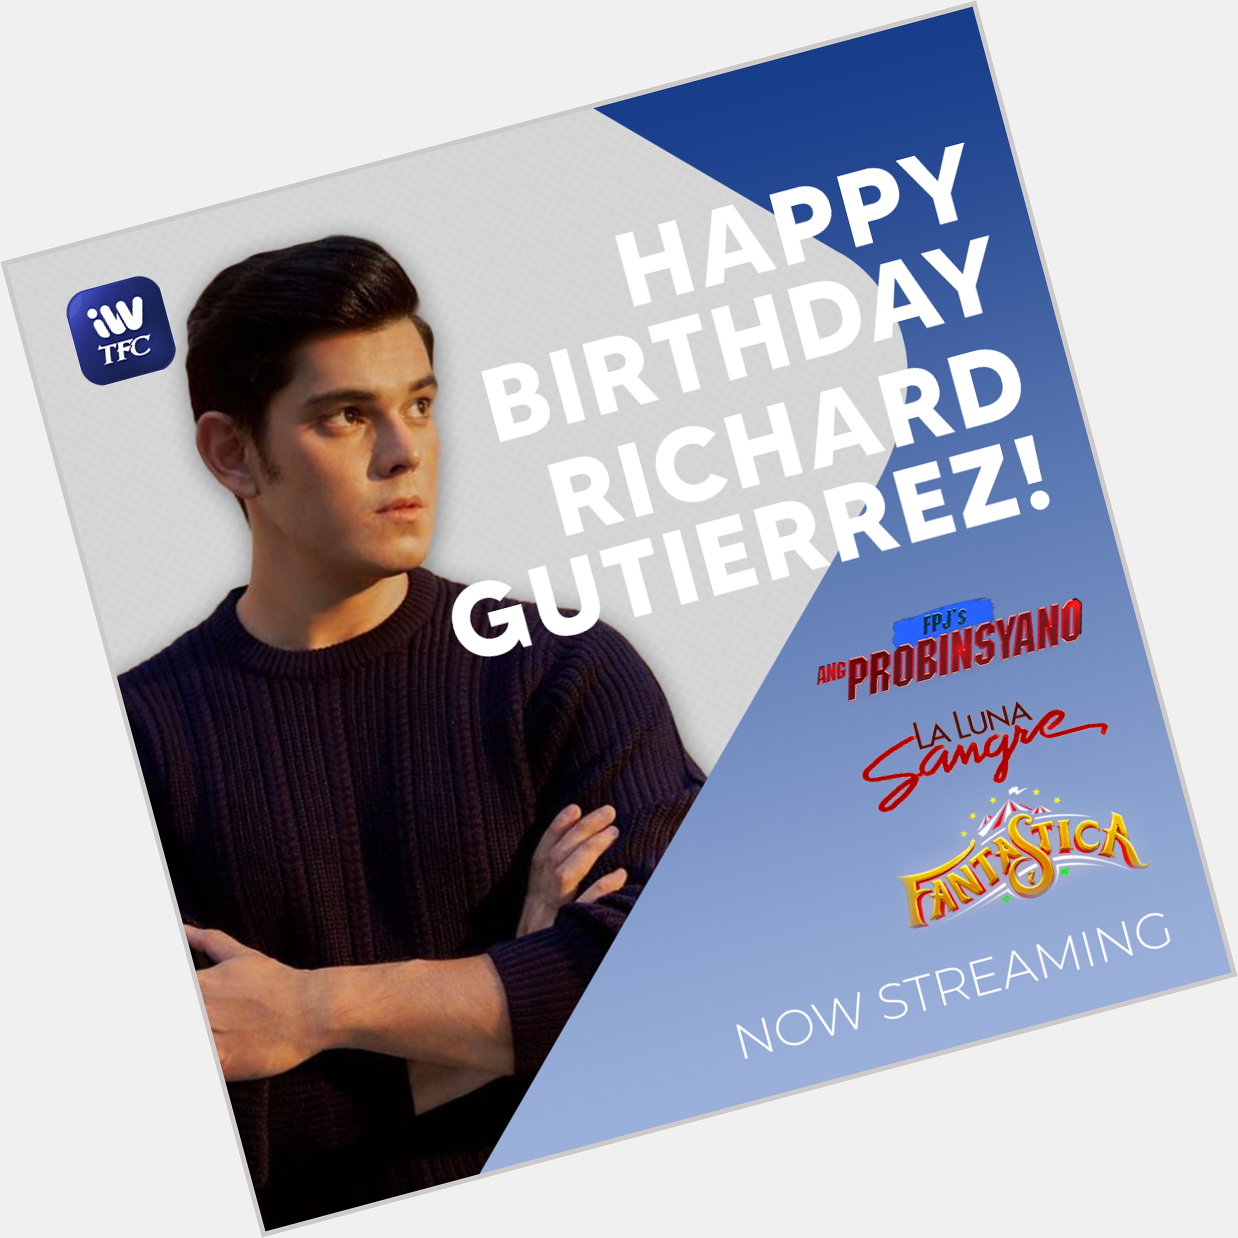 Happy birthday, Richard Gutierrez!   Celebrate today by watching his shows and movies on iWantTFC! 